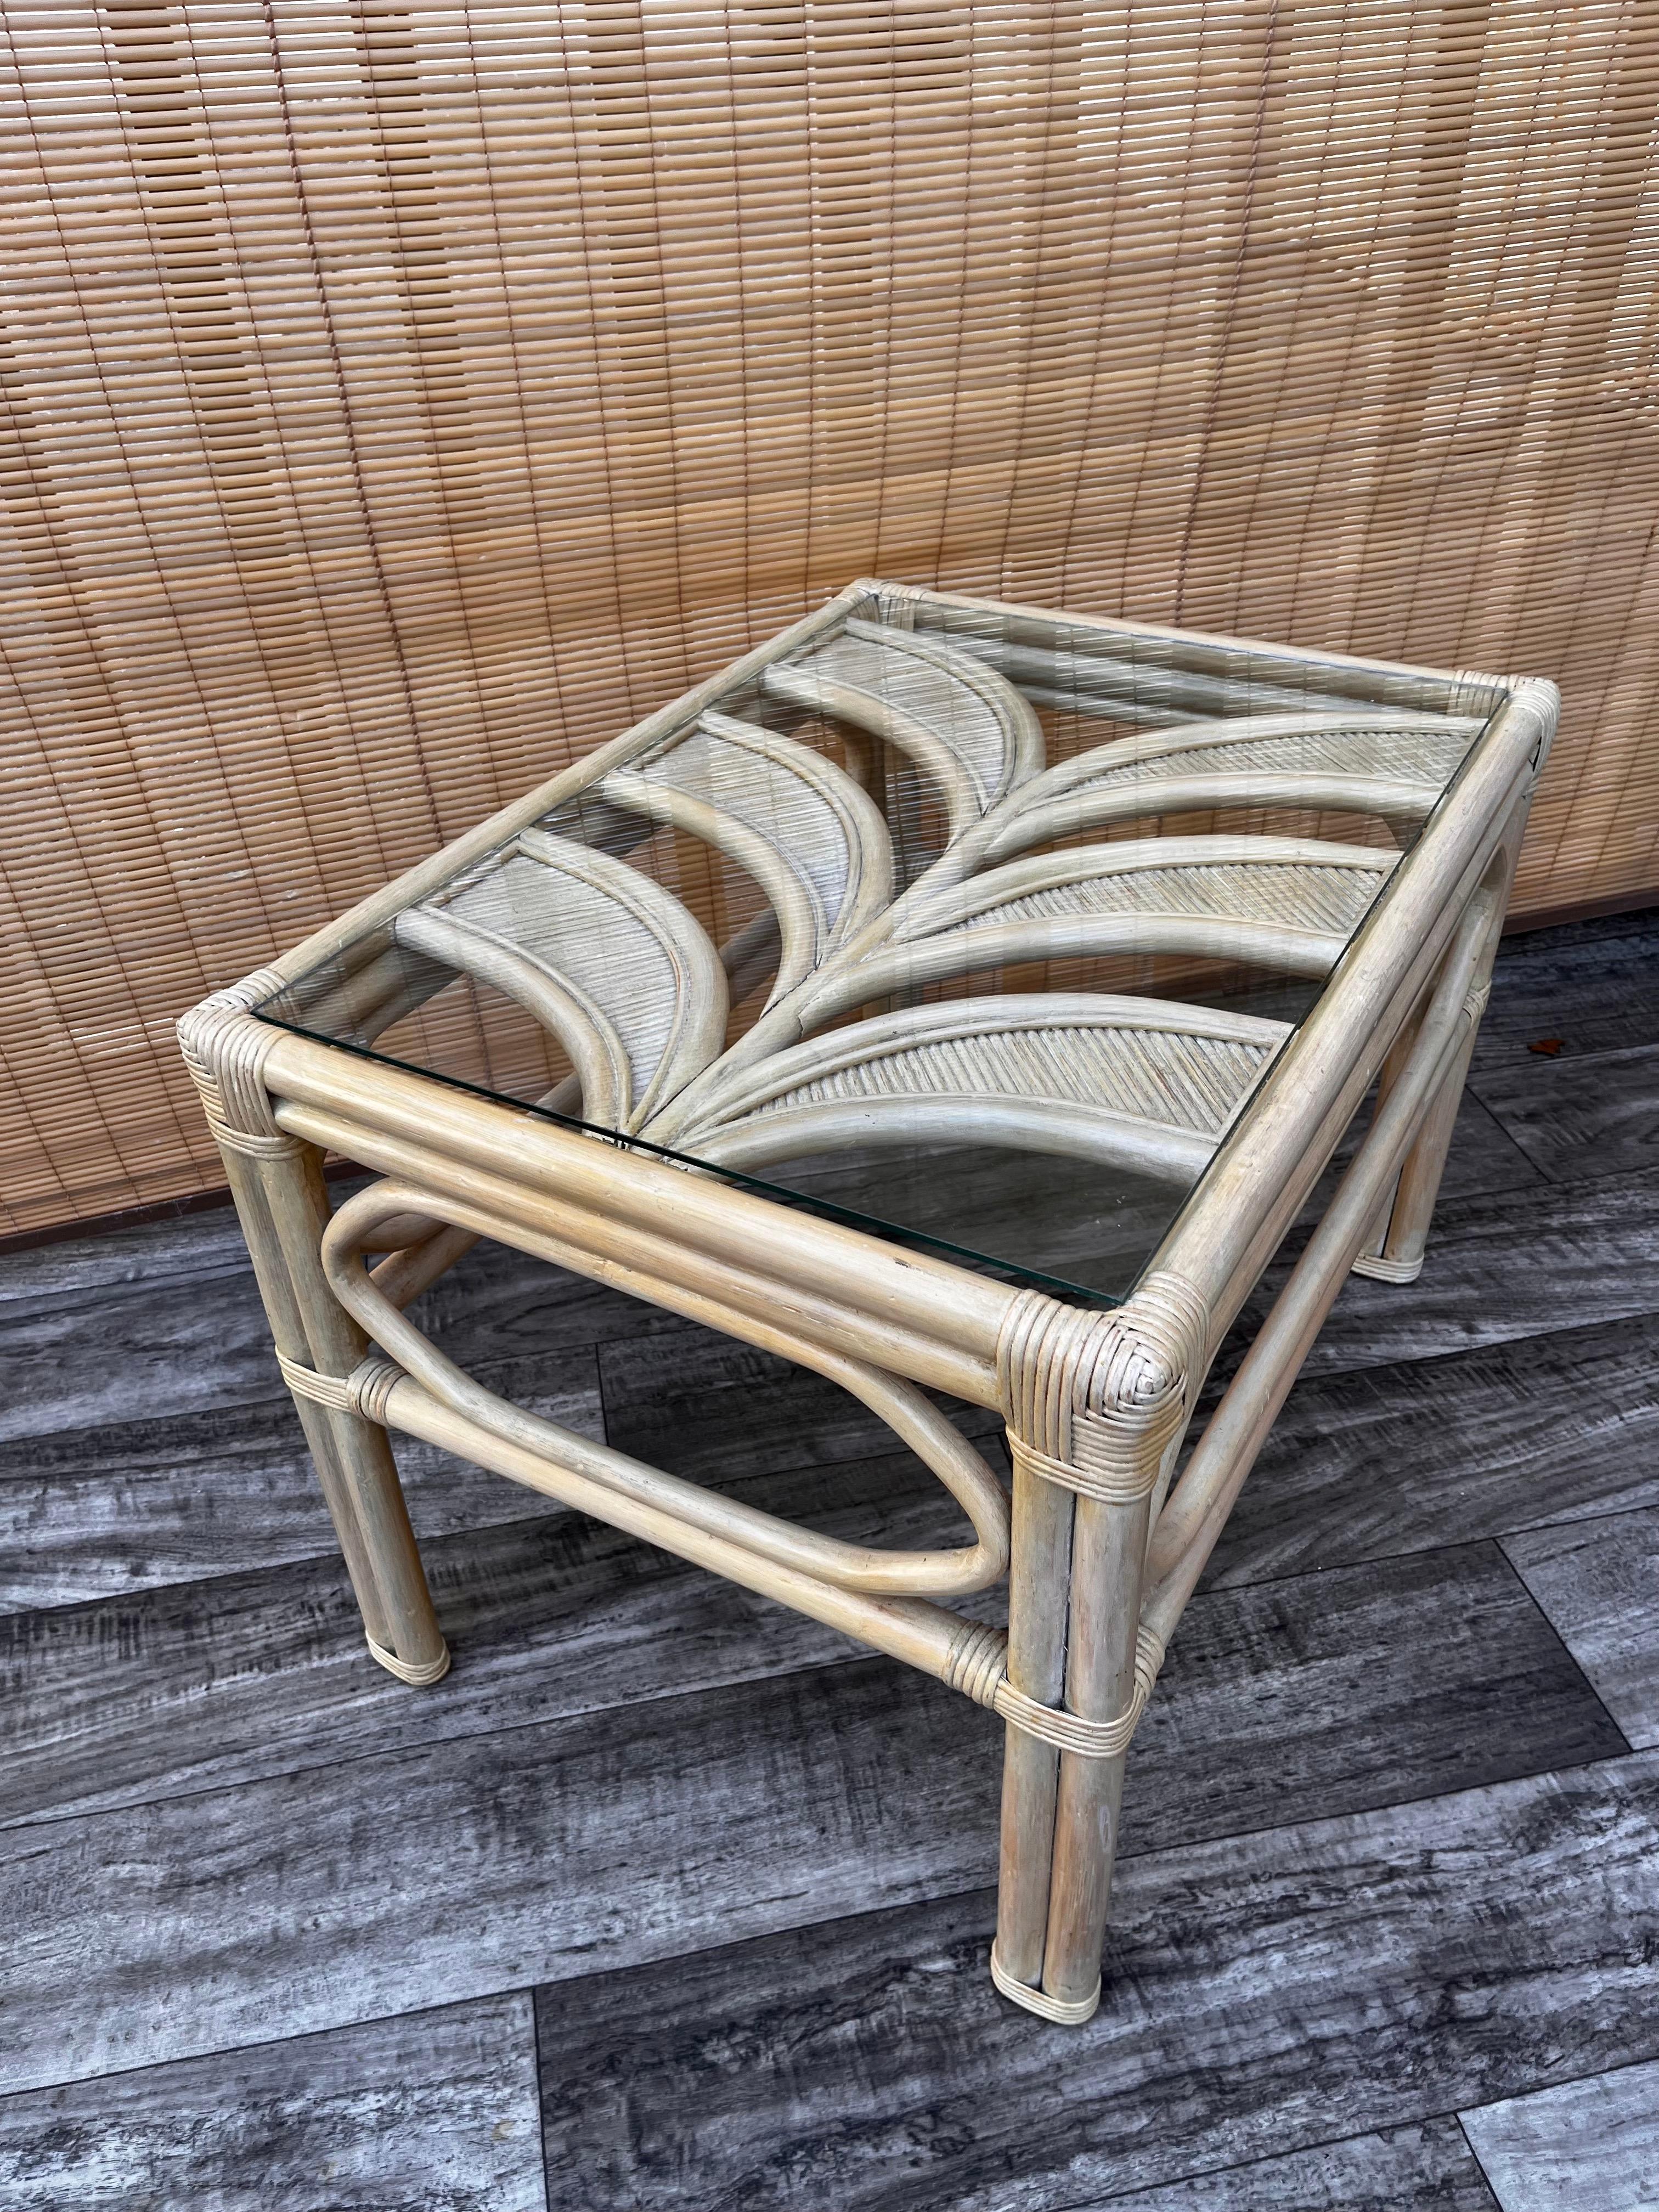 Vintage Palm Beach Regency pencil reed palm leaf glass top side table, circa 1980s. 
Features a pencil reed palm leaf motive top with a bleached rattan frame, and a removable glass top.
In excellent near mint original condition with very minor signs